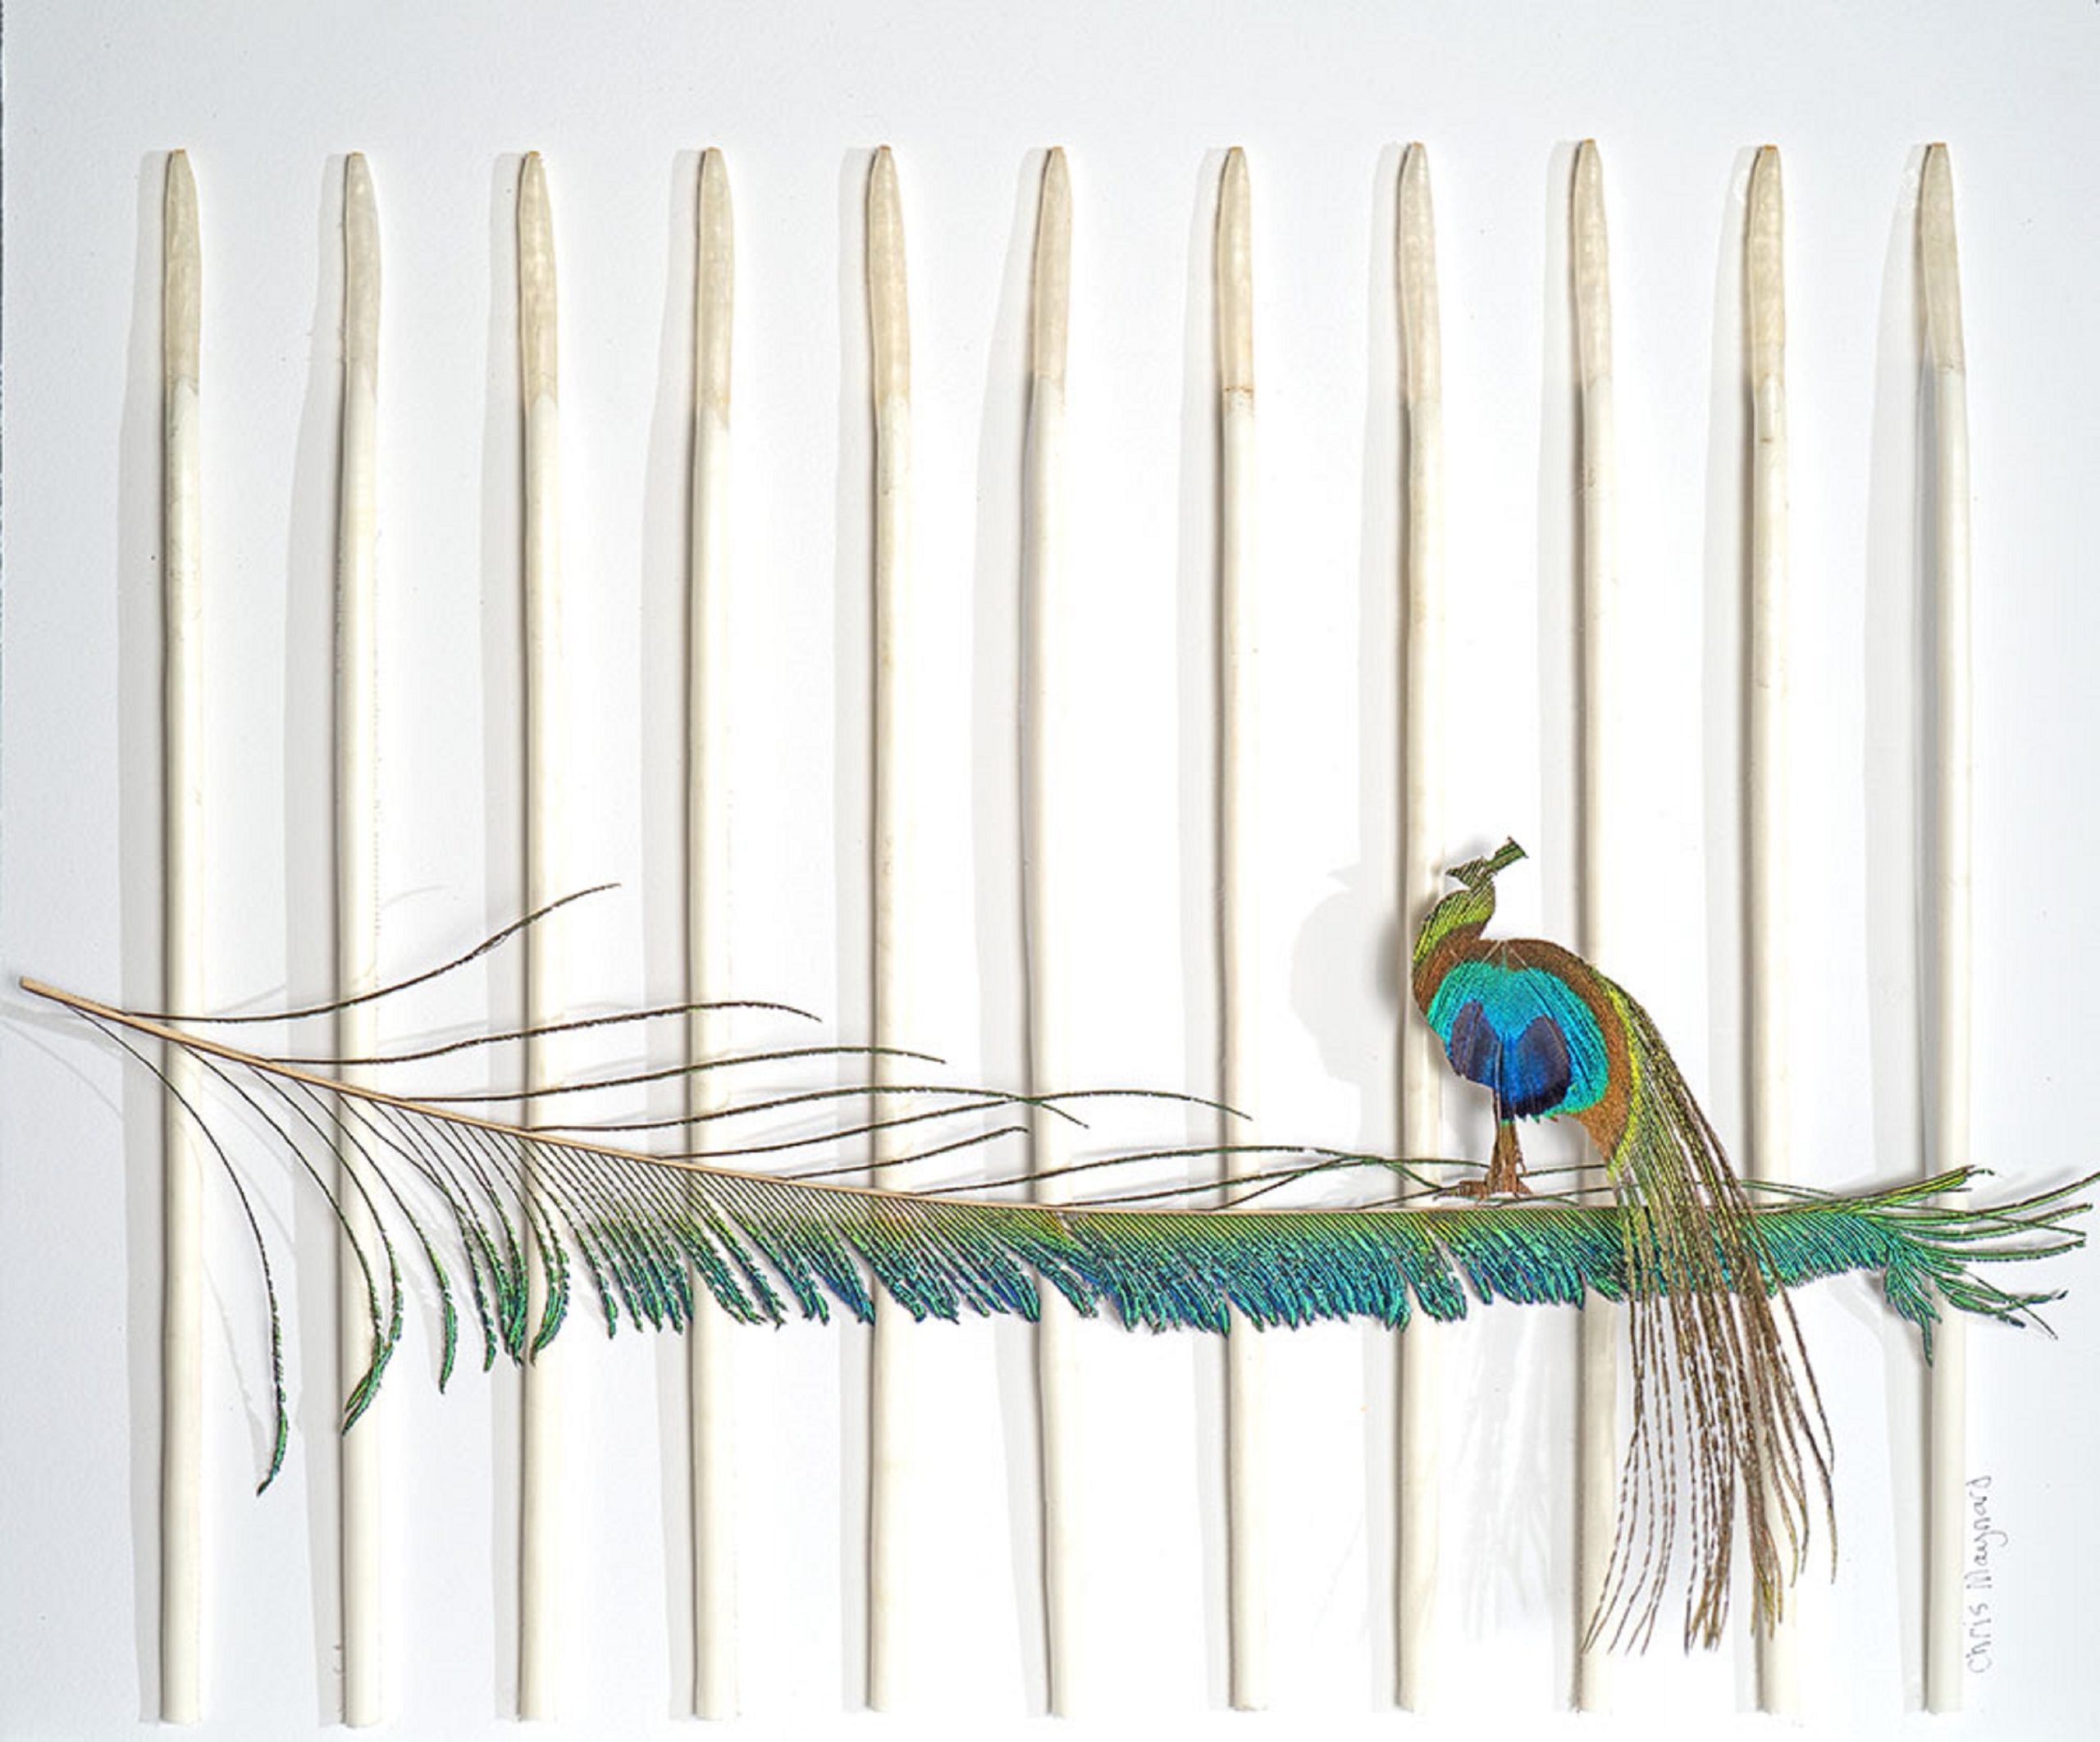 

											Chris Maynard</b>

											<em>
												Chris Maynard: New Works</em> 

											<h4>
												Currently on view through April 1, 2022											</h4>

		                																																													<i>Peacock and Quills,</i>  
																																								2021, 
																																								peacock feathers including quills, 
																																								10 x 12 inches 
																								
		                				